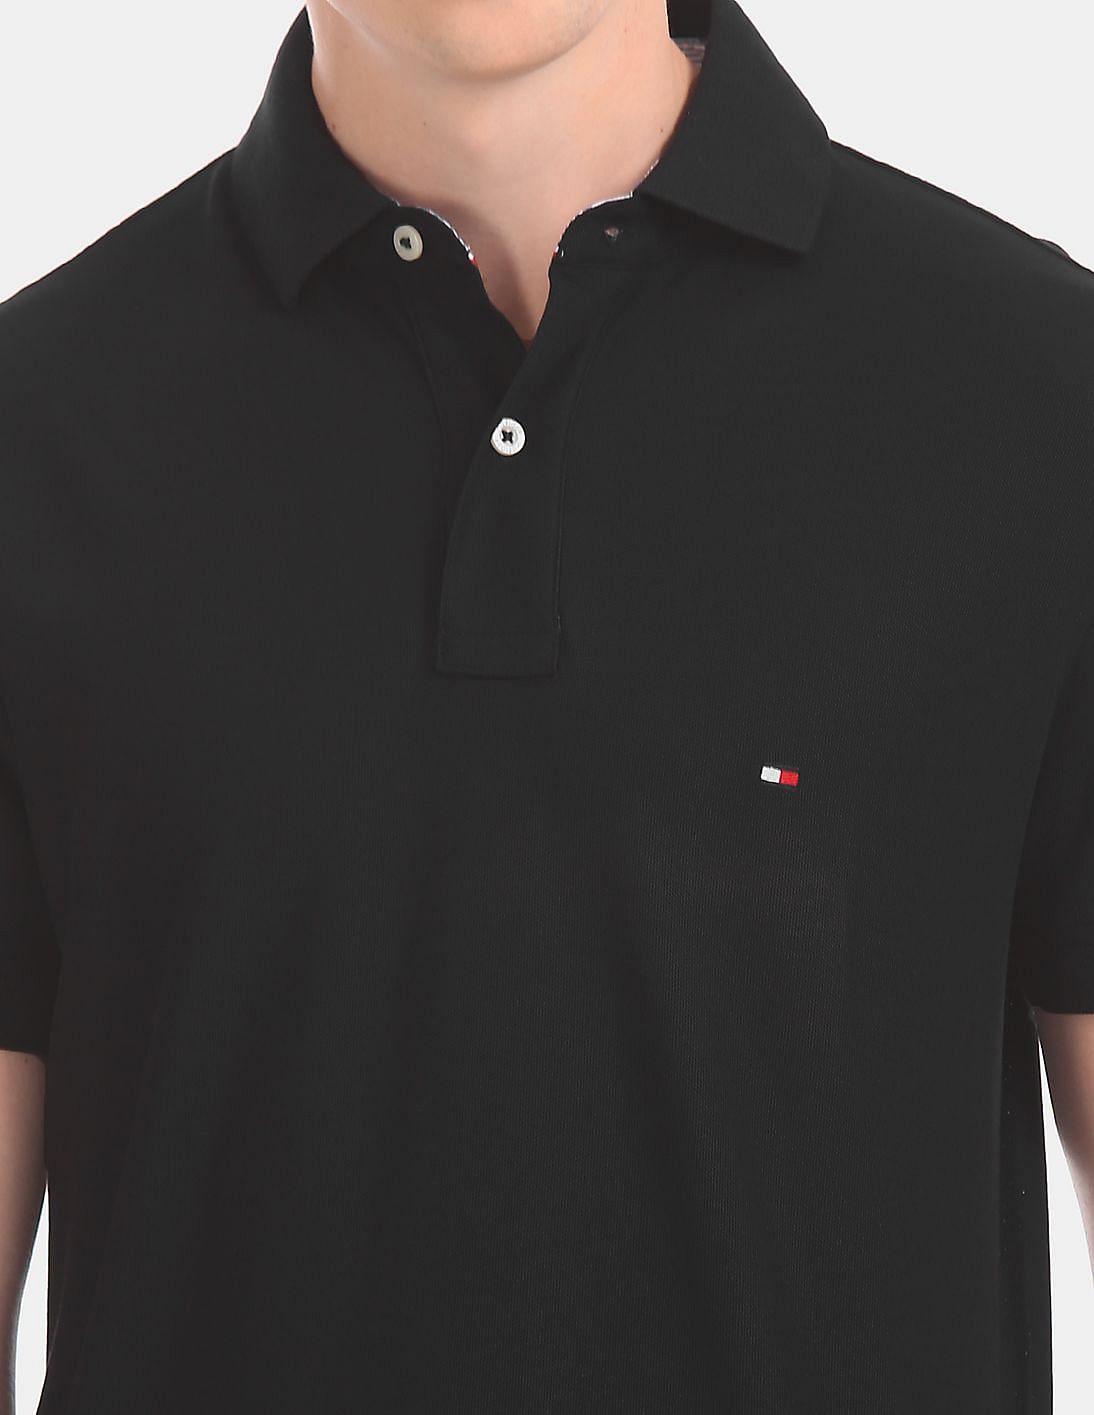 Tommy Hilfiger Tjm Solid Stretch Polo Shirt in Black for Men Mens Clothing T-shirts Polo shirts 